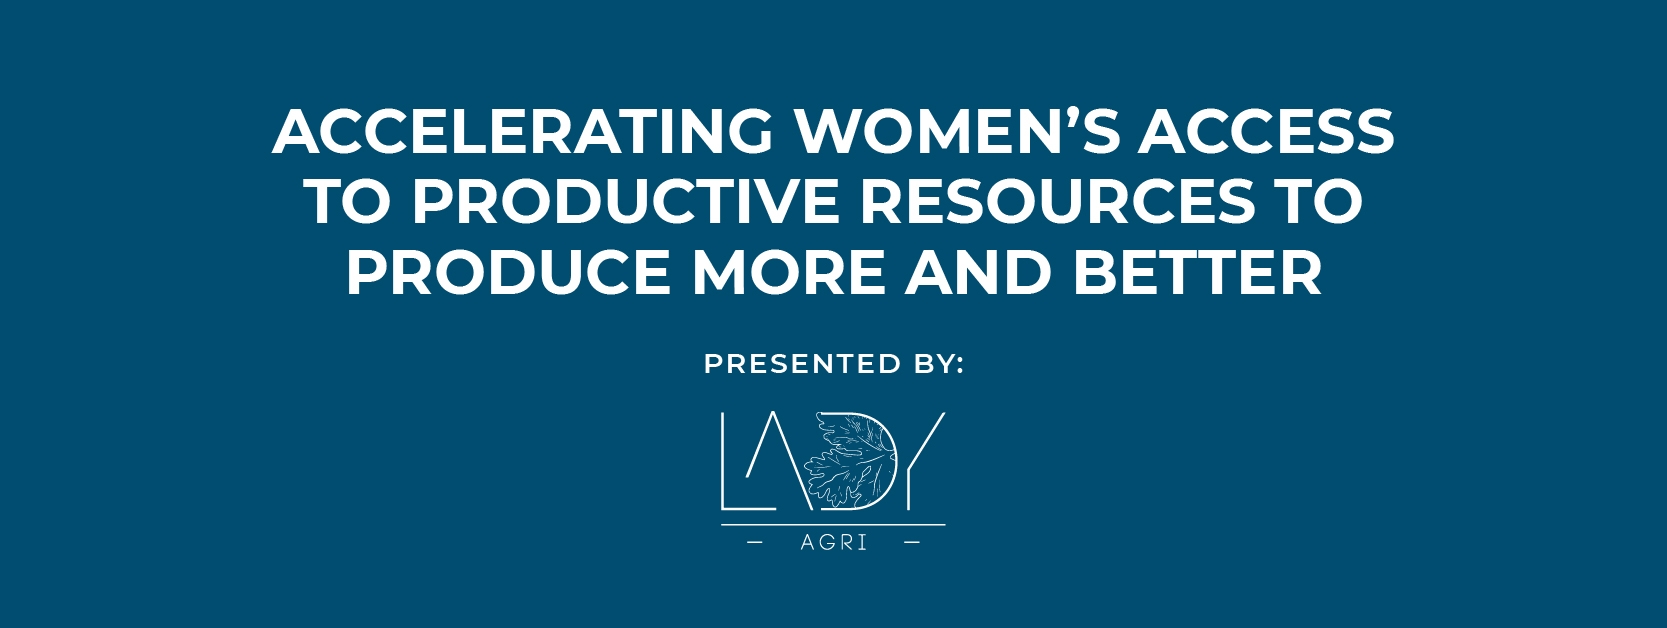 Accelerating Women’s Access to Productive Resources To Produce More and Better